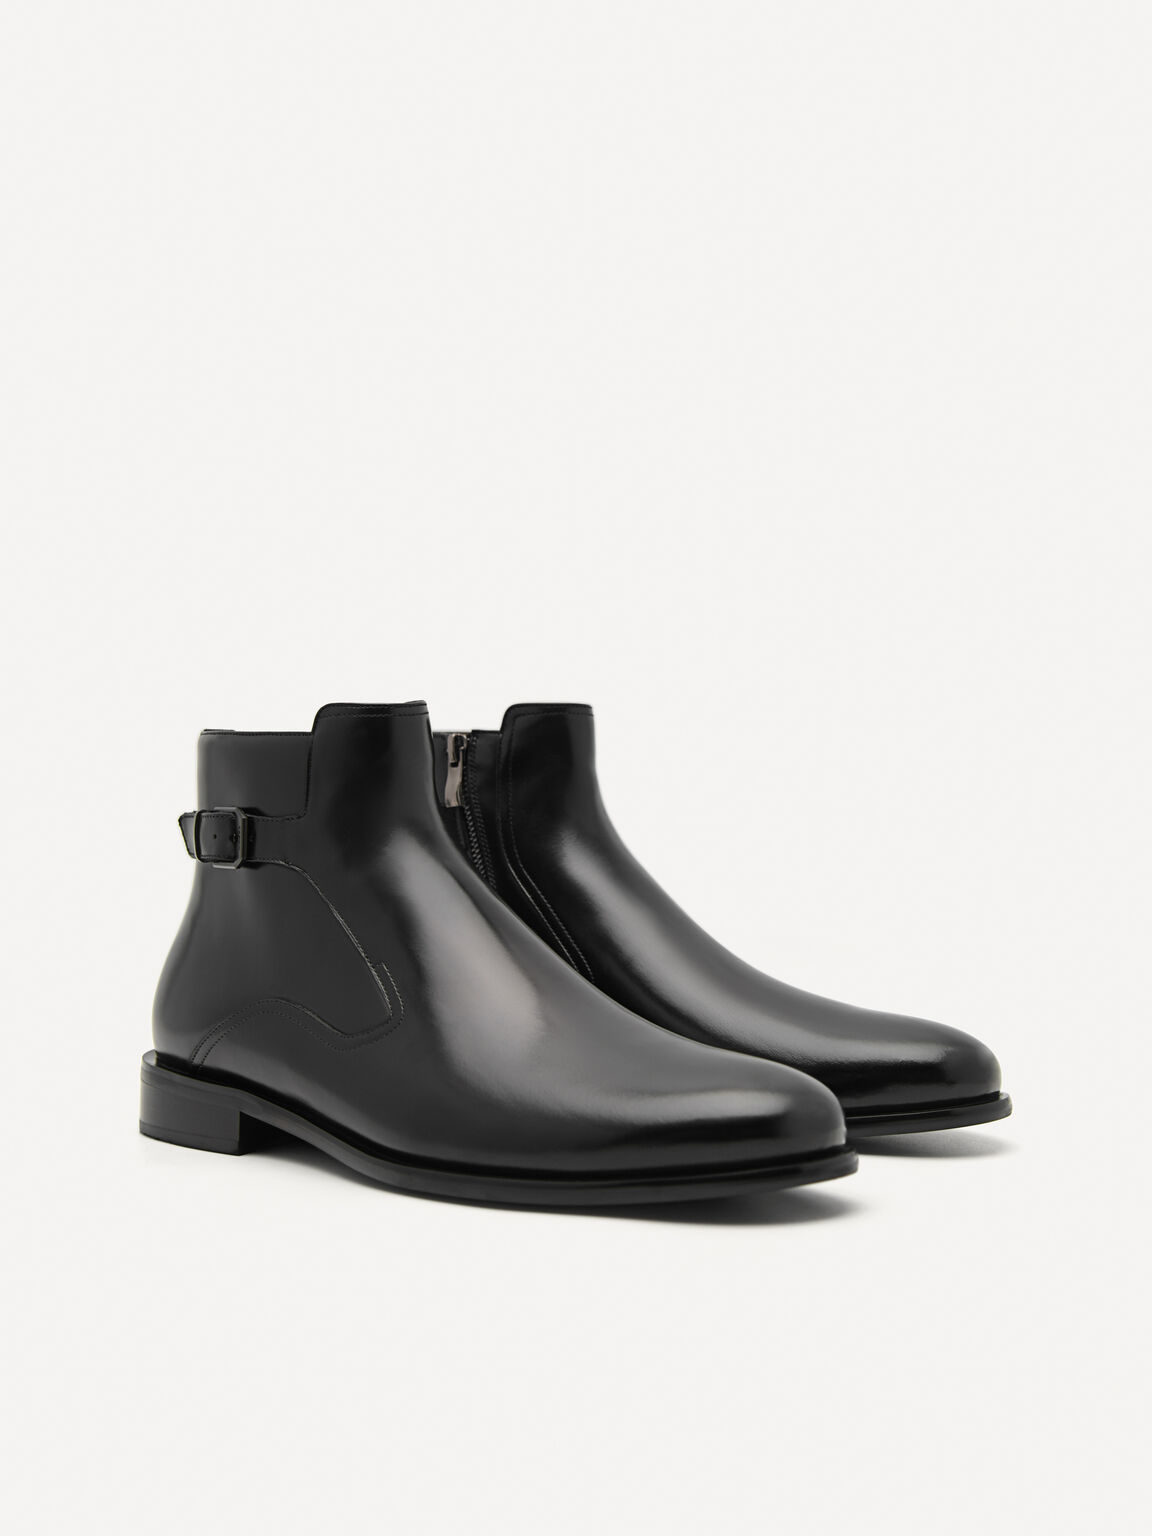 Leather Ankle Boots, Black